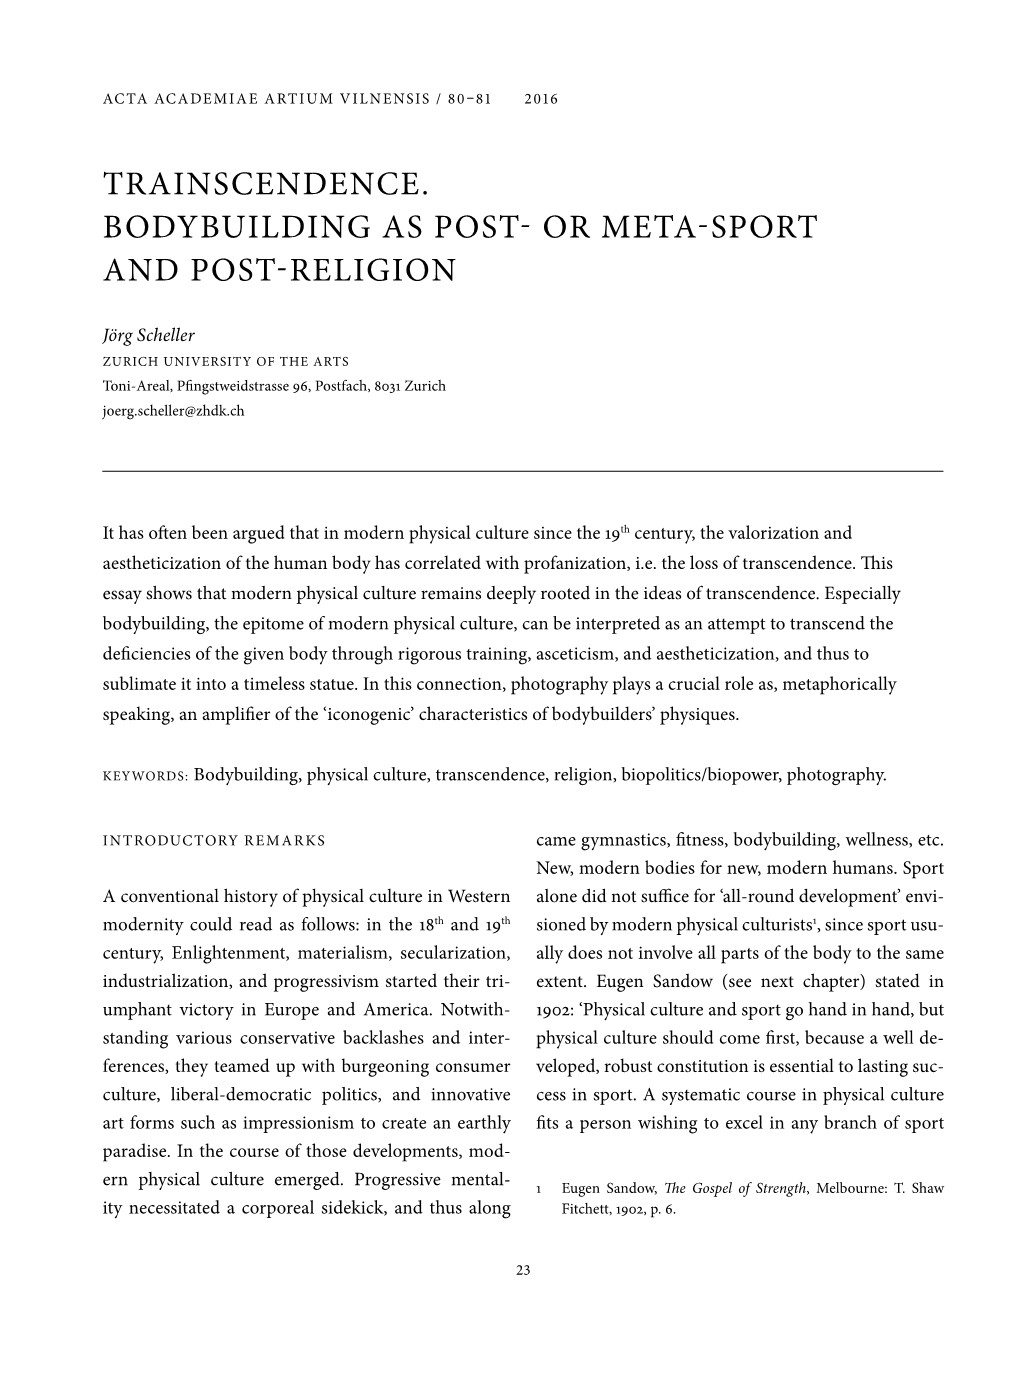 Trainscendence. Bodybuilding As Post- Or Meta-Sport and Post-Religion